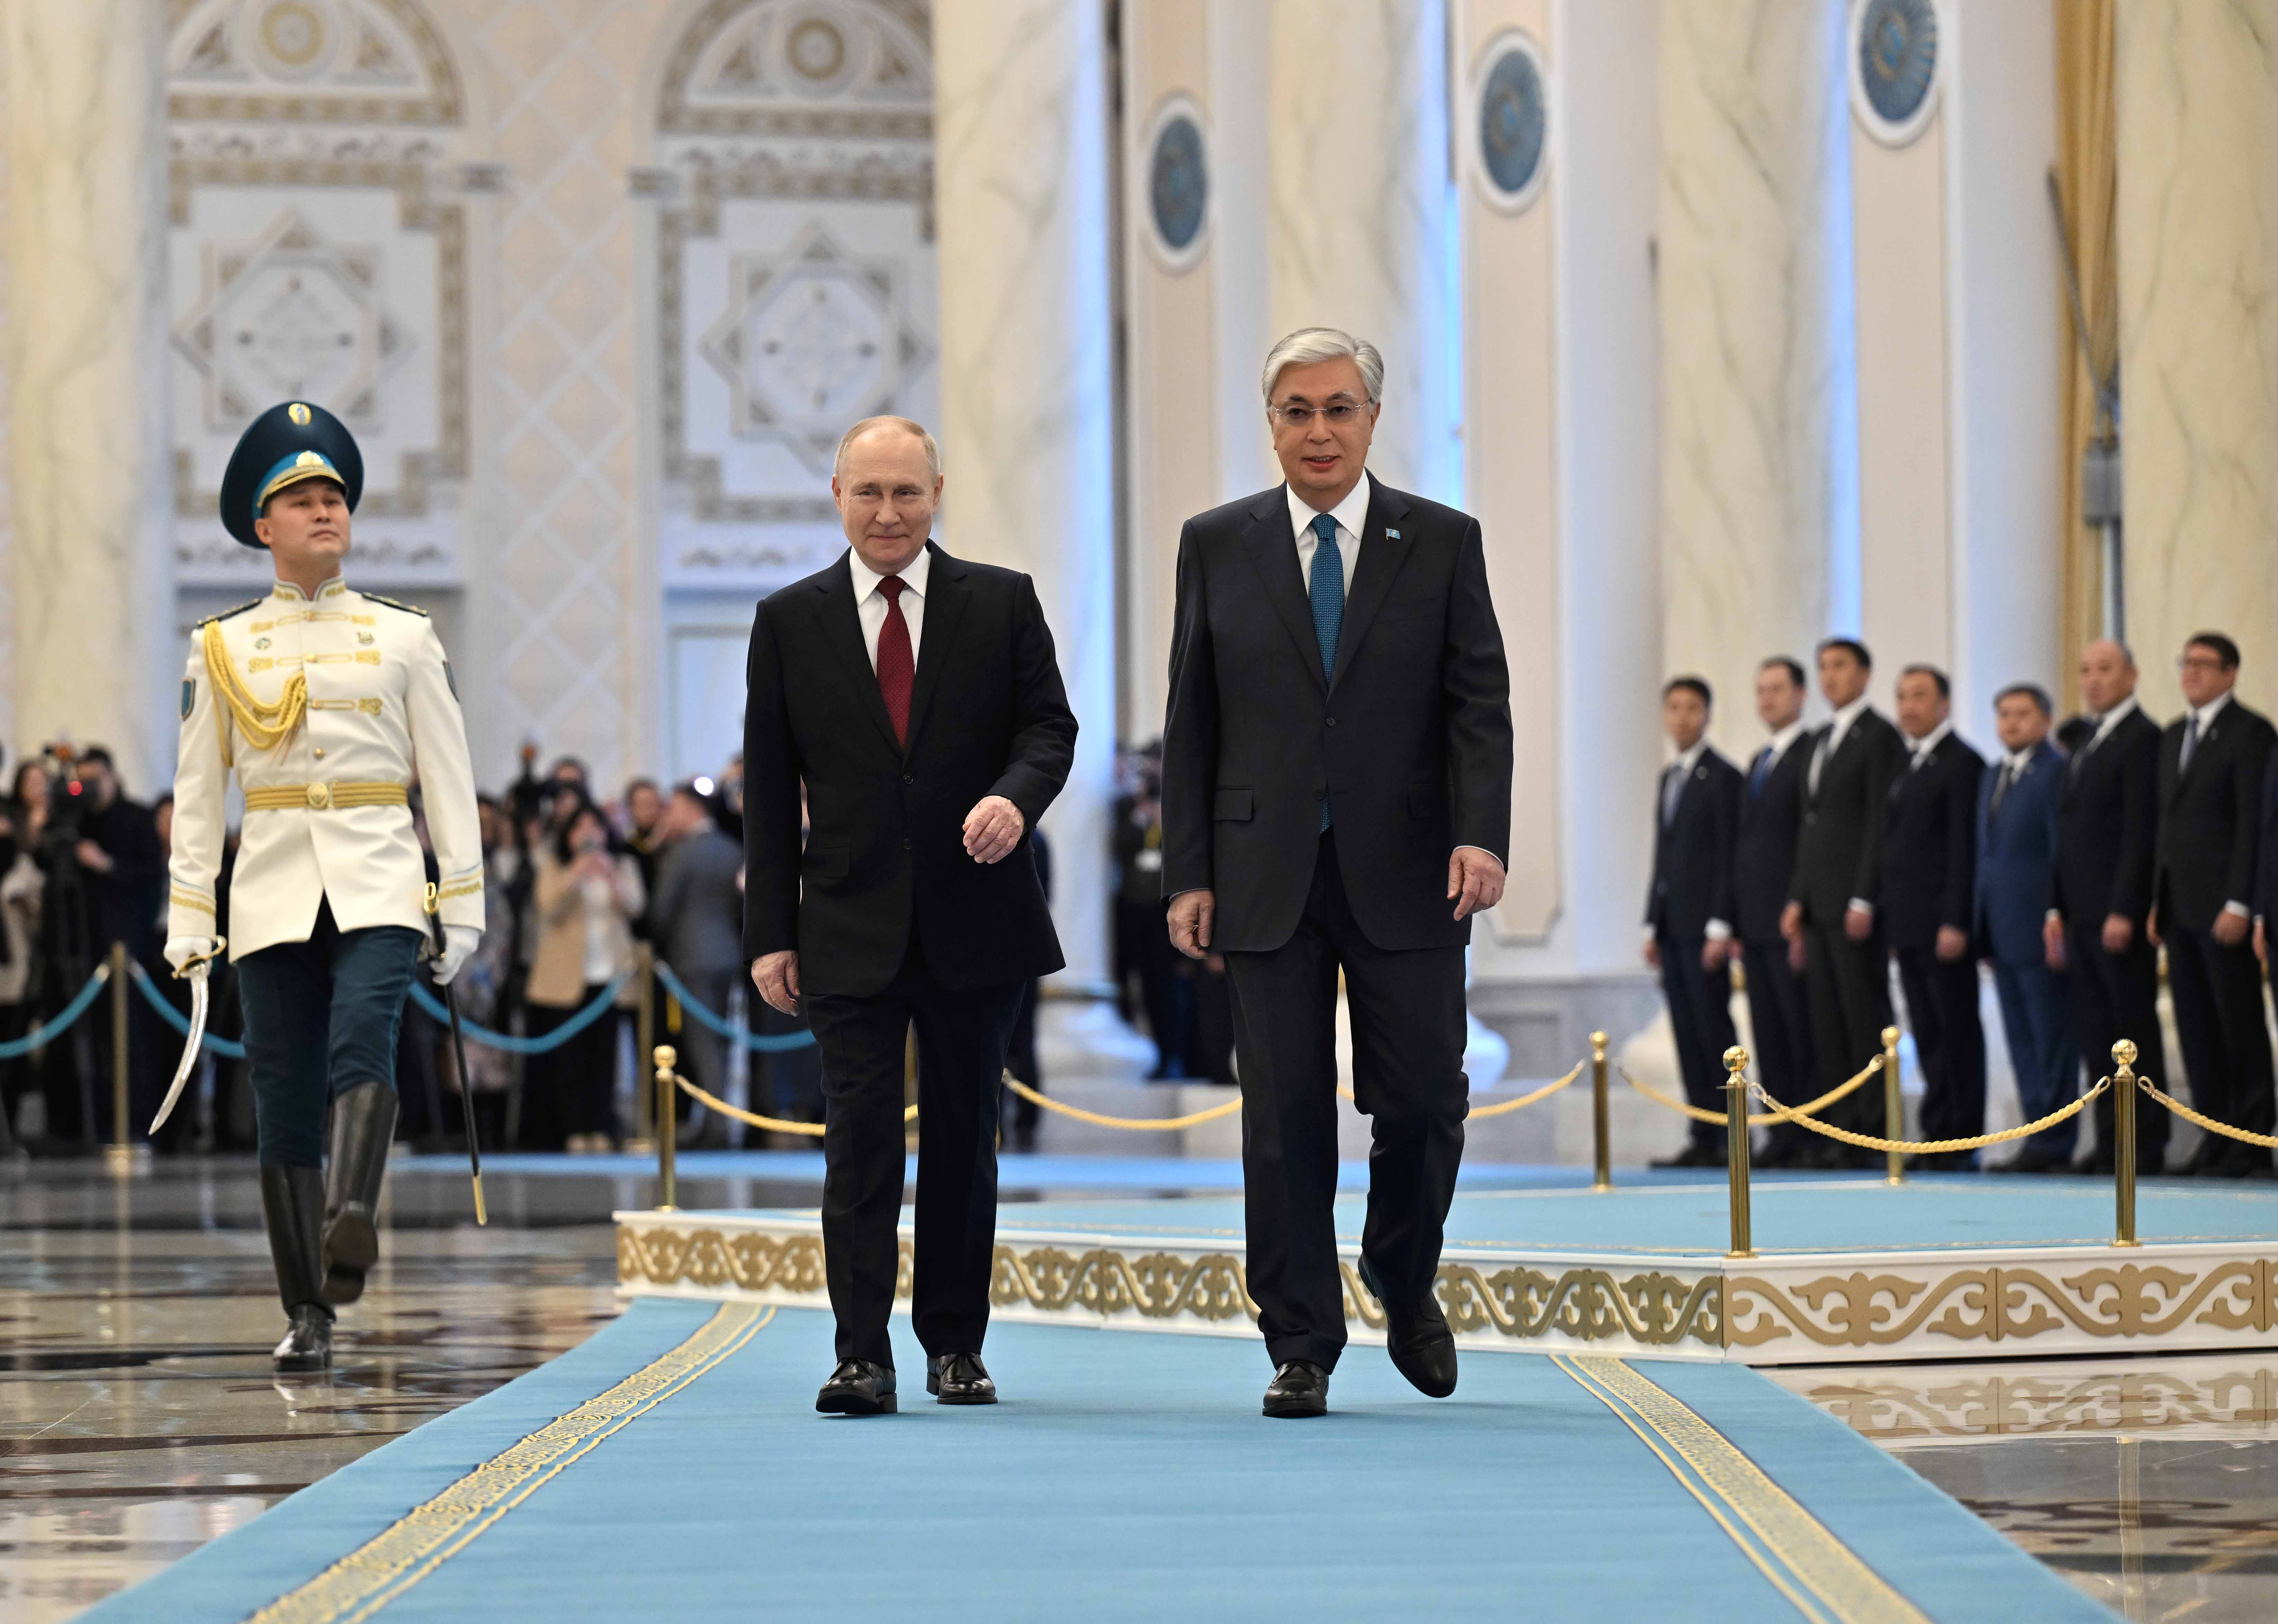 19th Kazakhstan-Russia forum: $27 bn trade turnover, $20bn investments, and agricultural growth plans unveiled 